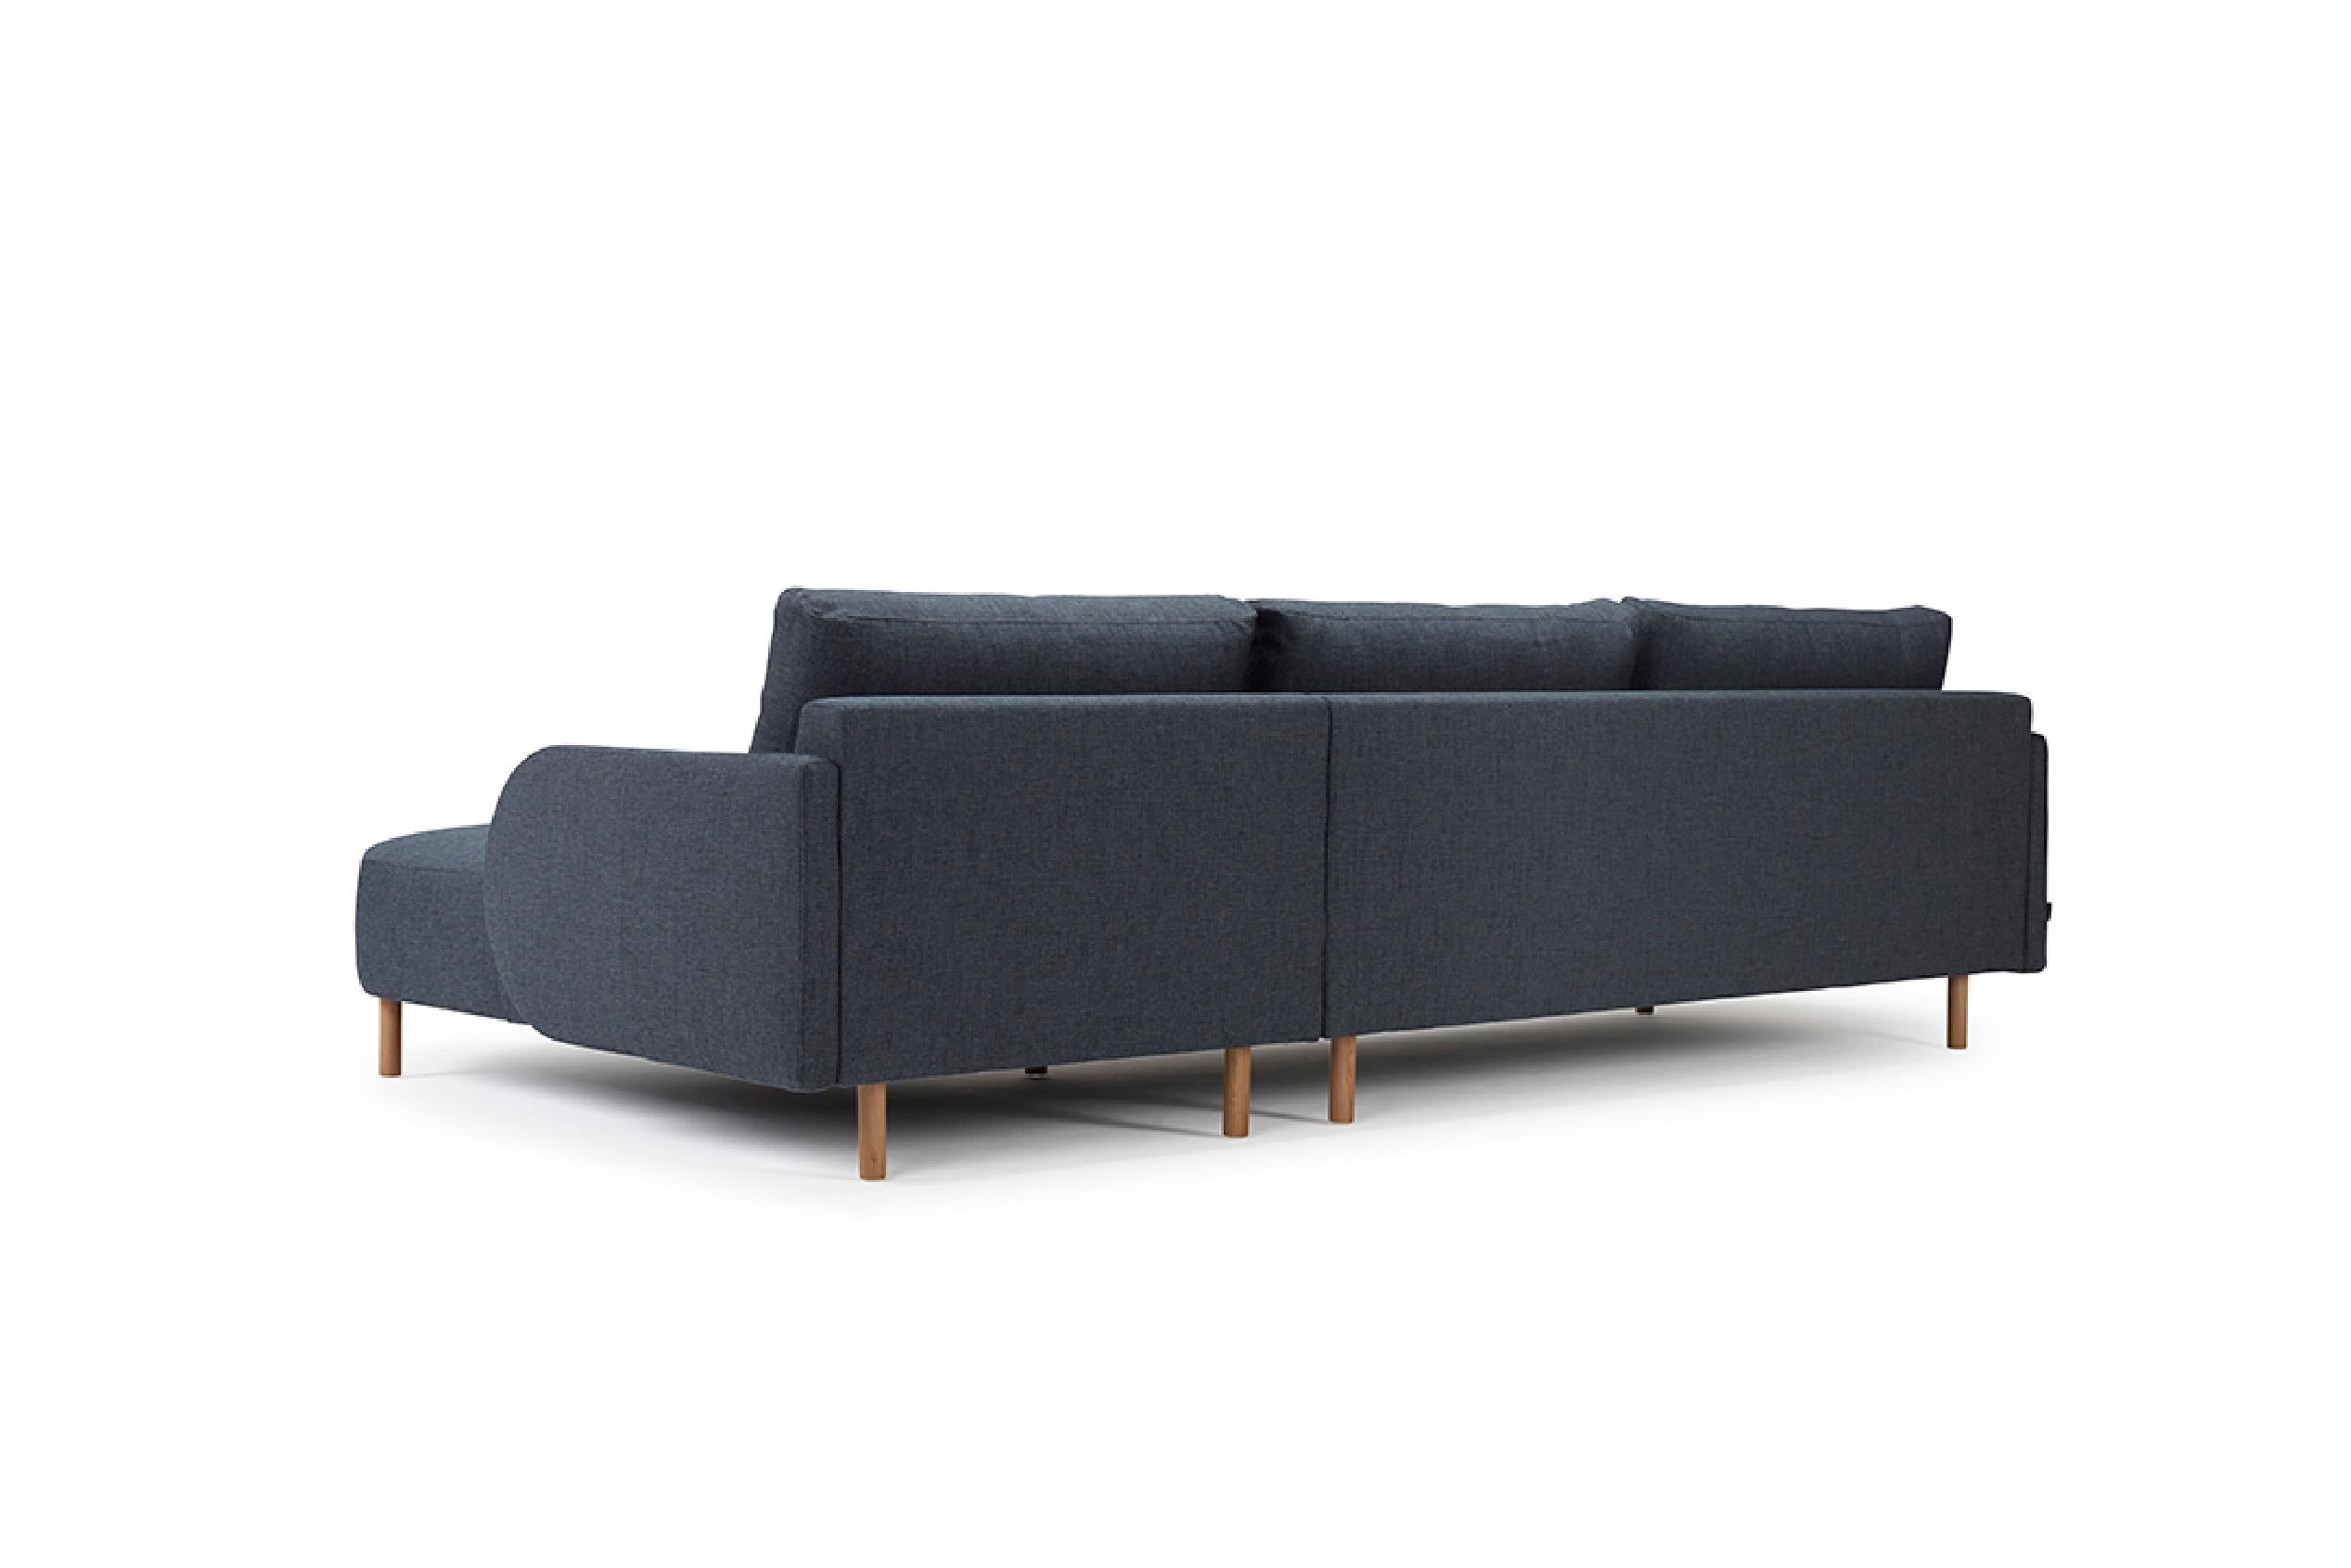 The Paleta Chaise+2 Sofa seamlessly blends clean, gentle contours with a modern design aesthetic. This OEM product presents options for black metal or oak lacquered legs, which harmonize with an array of fabric or wool upholstery finishes. Designed